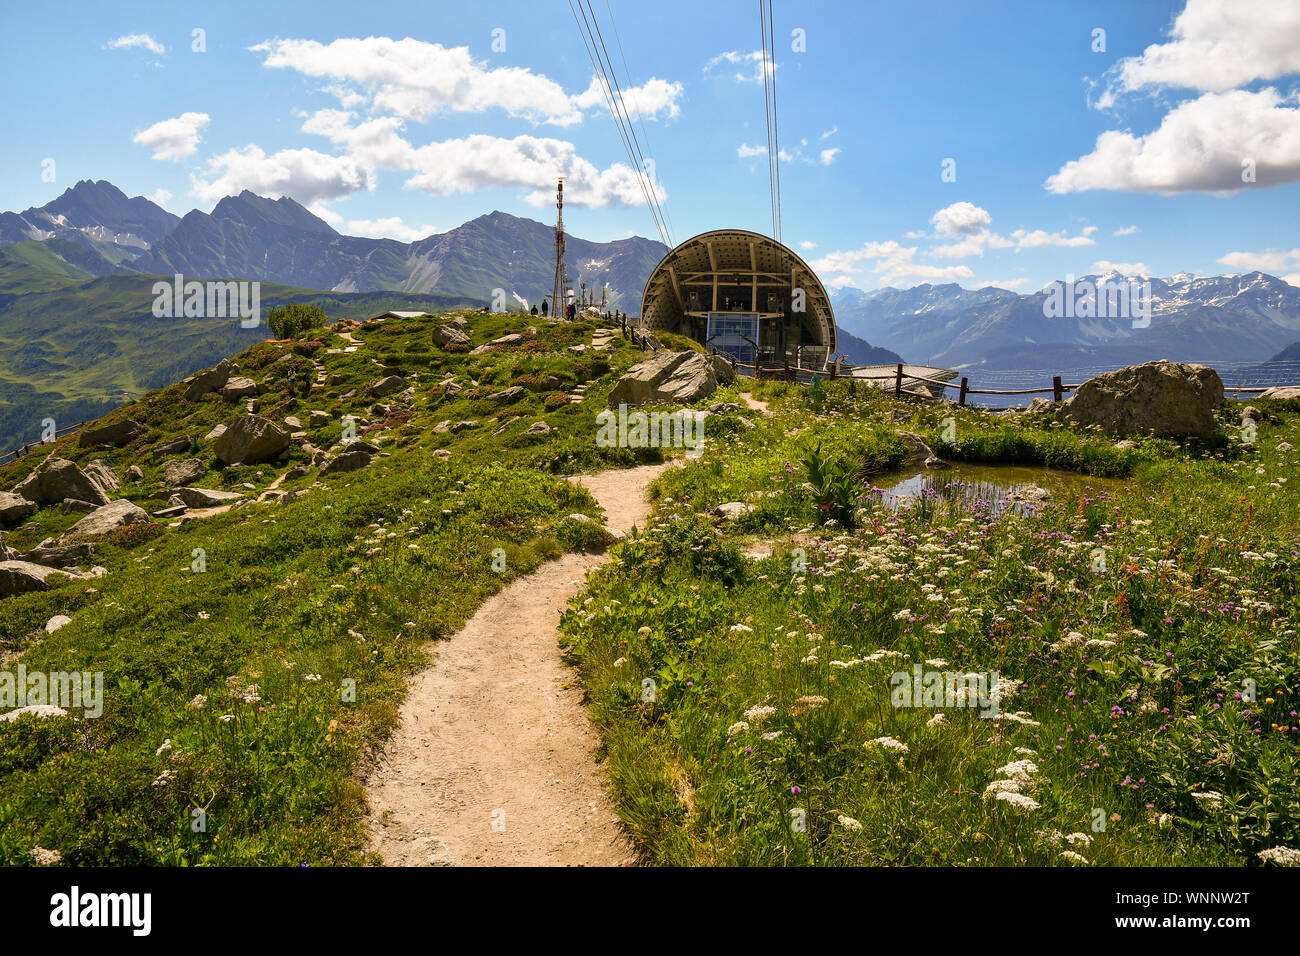 View of the Saussurea Alpine Botanical Garden of Skyway Monte Bianco cableway with a footpath and a small pond in summer, Courmayeur, Aosta, Italy Stock Photo